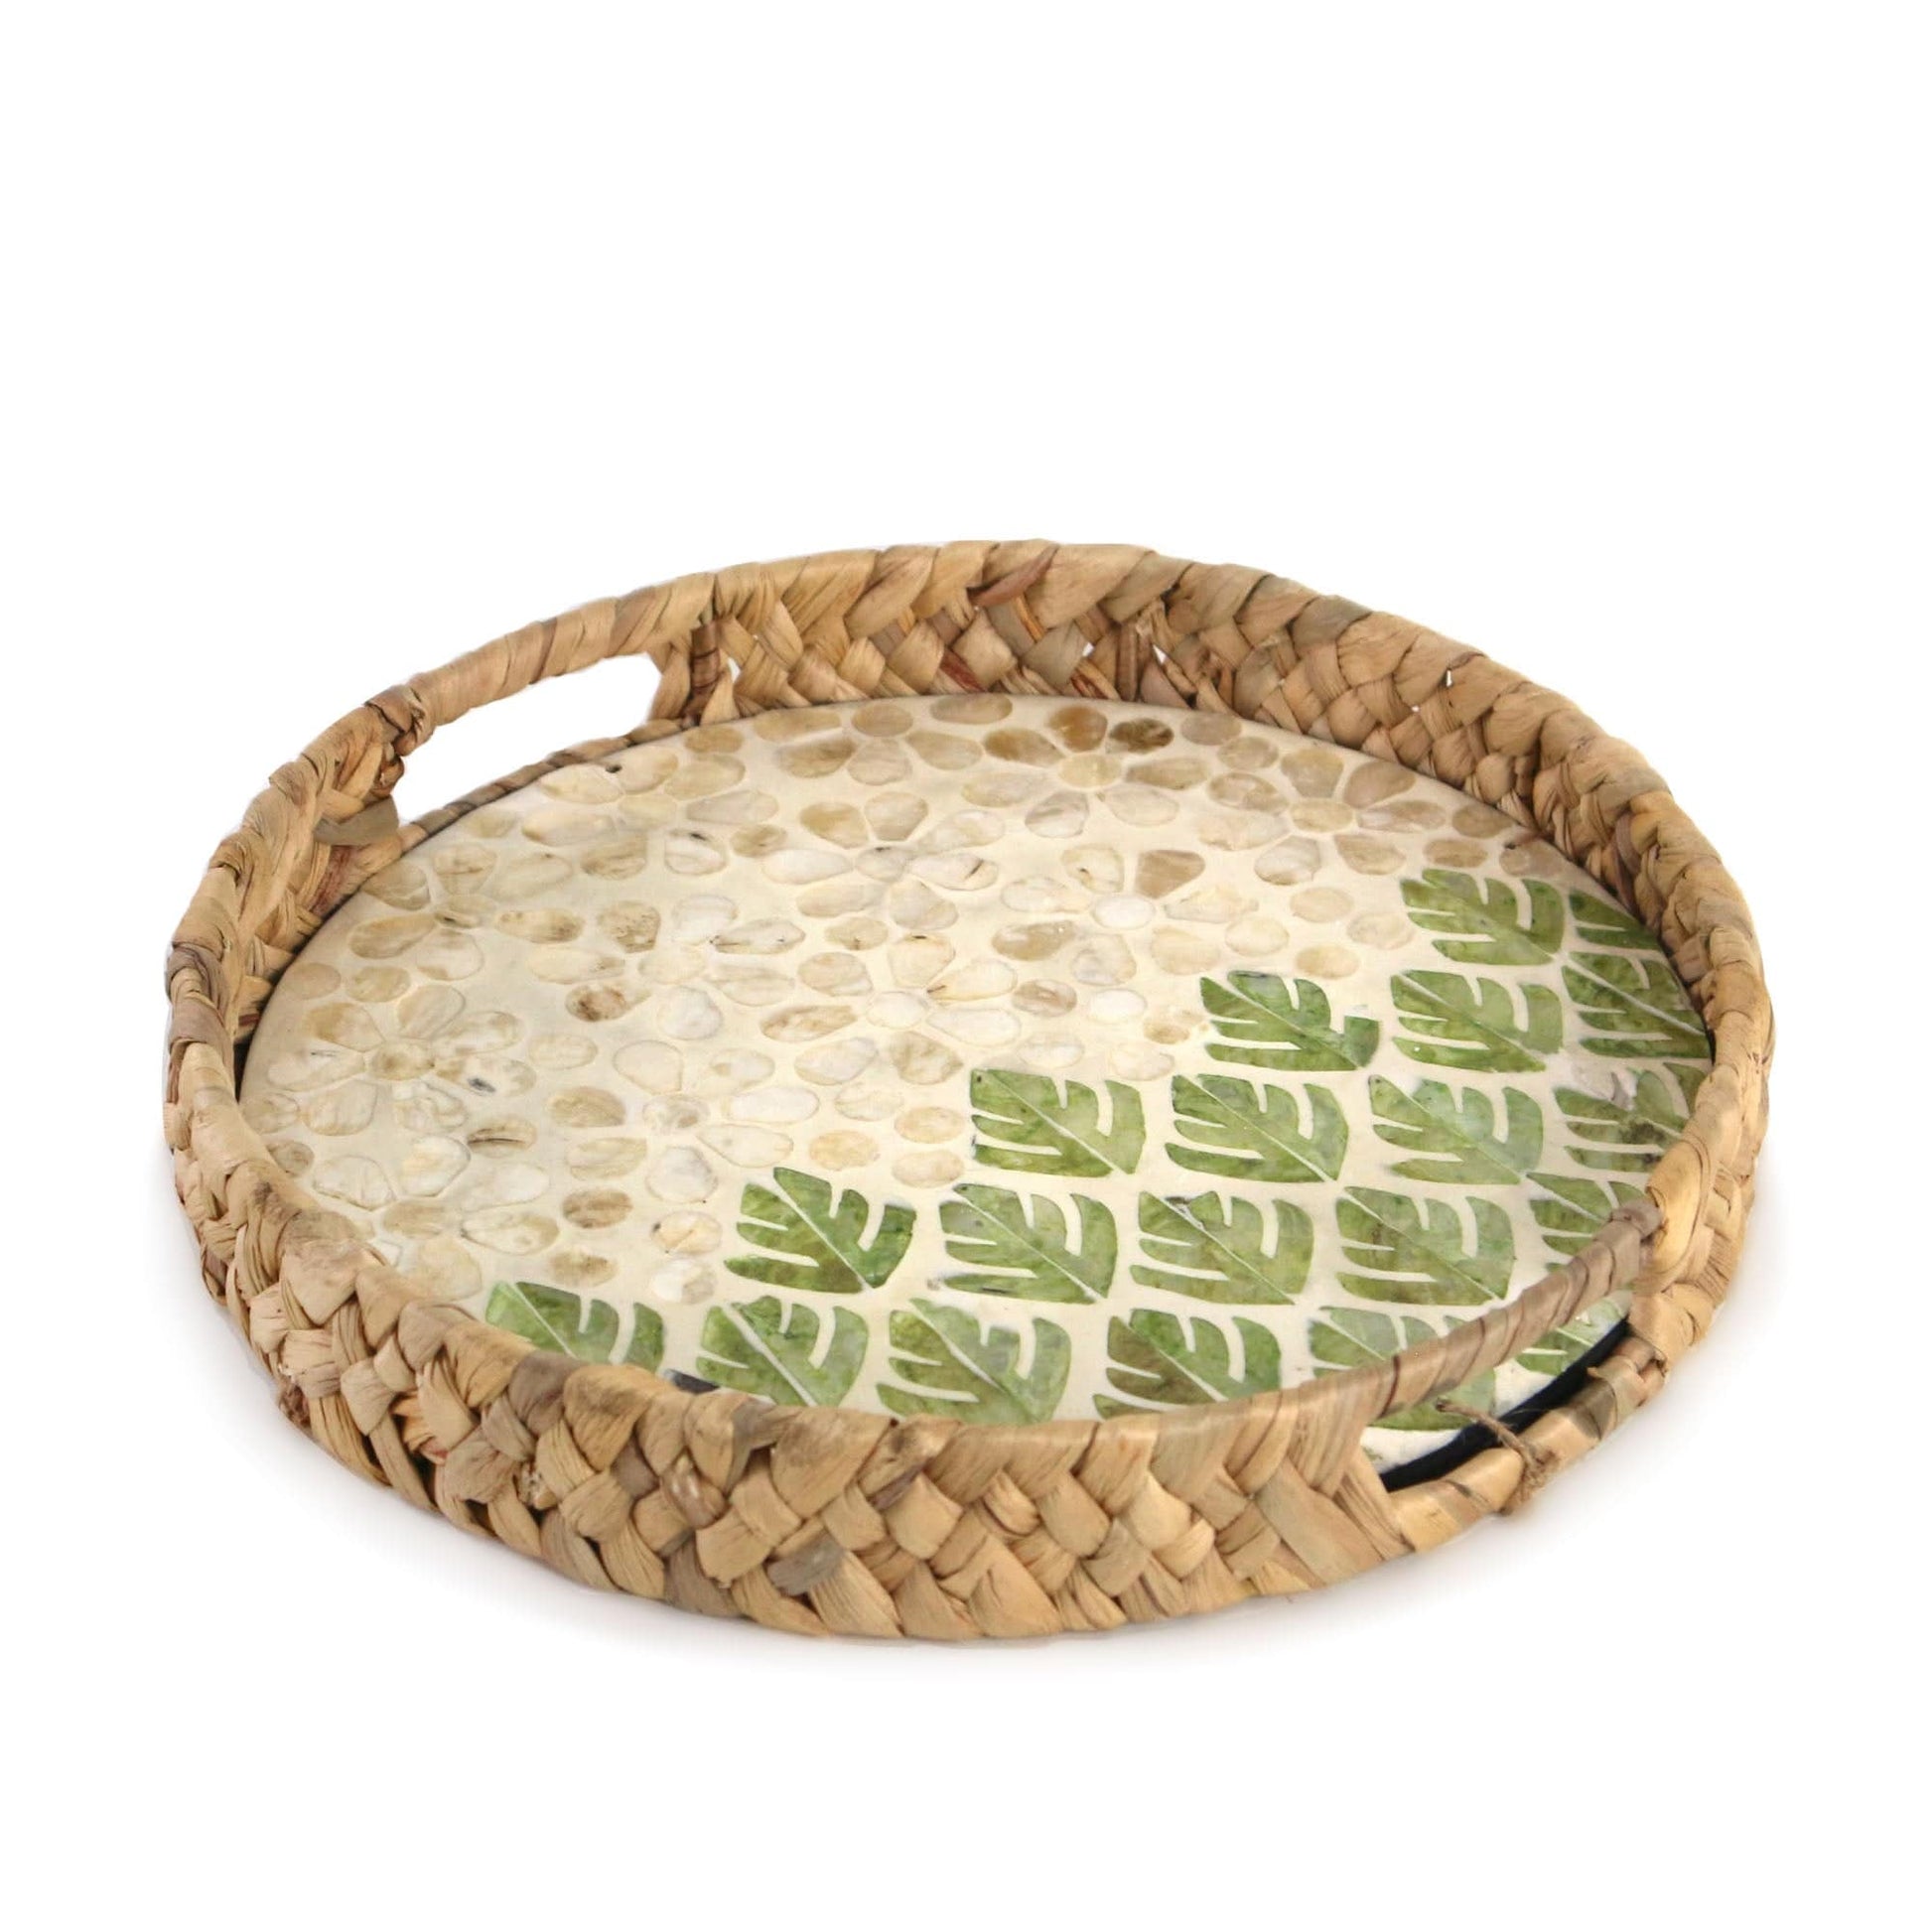 Round Water Hyacinth Tray with Mother of Pearl Inlay Wooden Base Insert Handle for Breakfast, Food, Coffee Table Decor, Decoration, Storage and Display - Almondscove